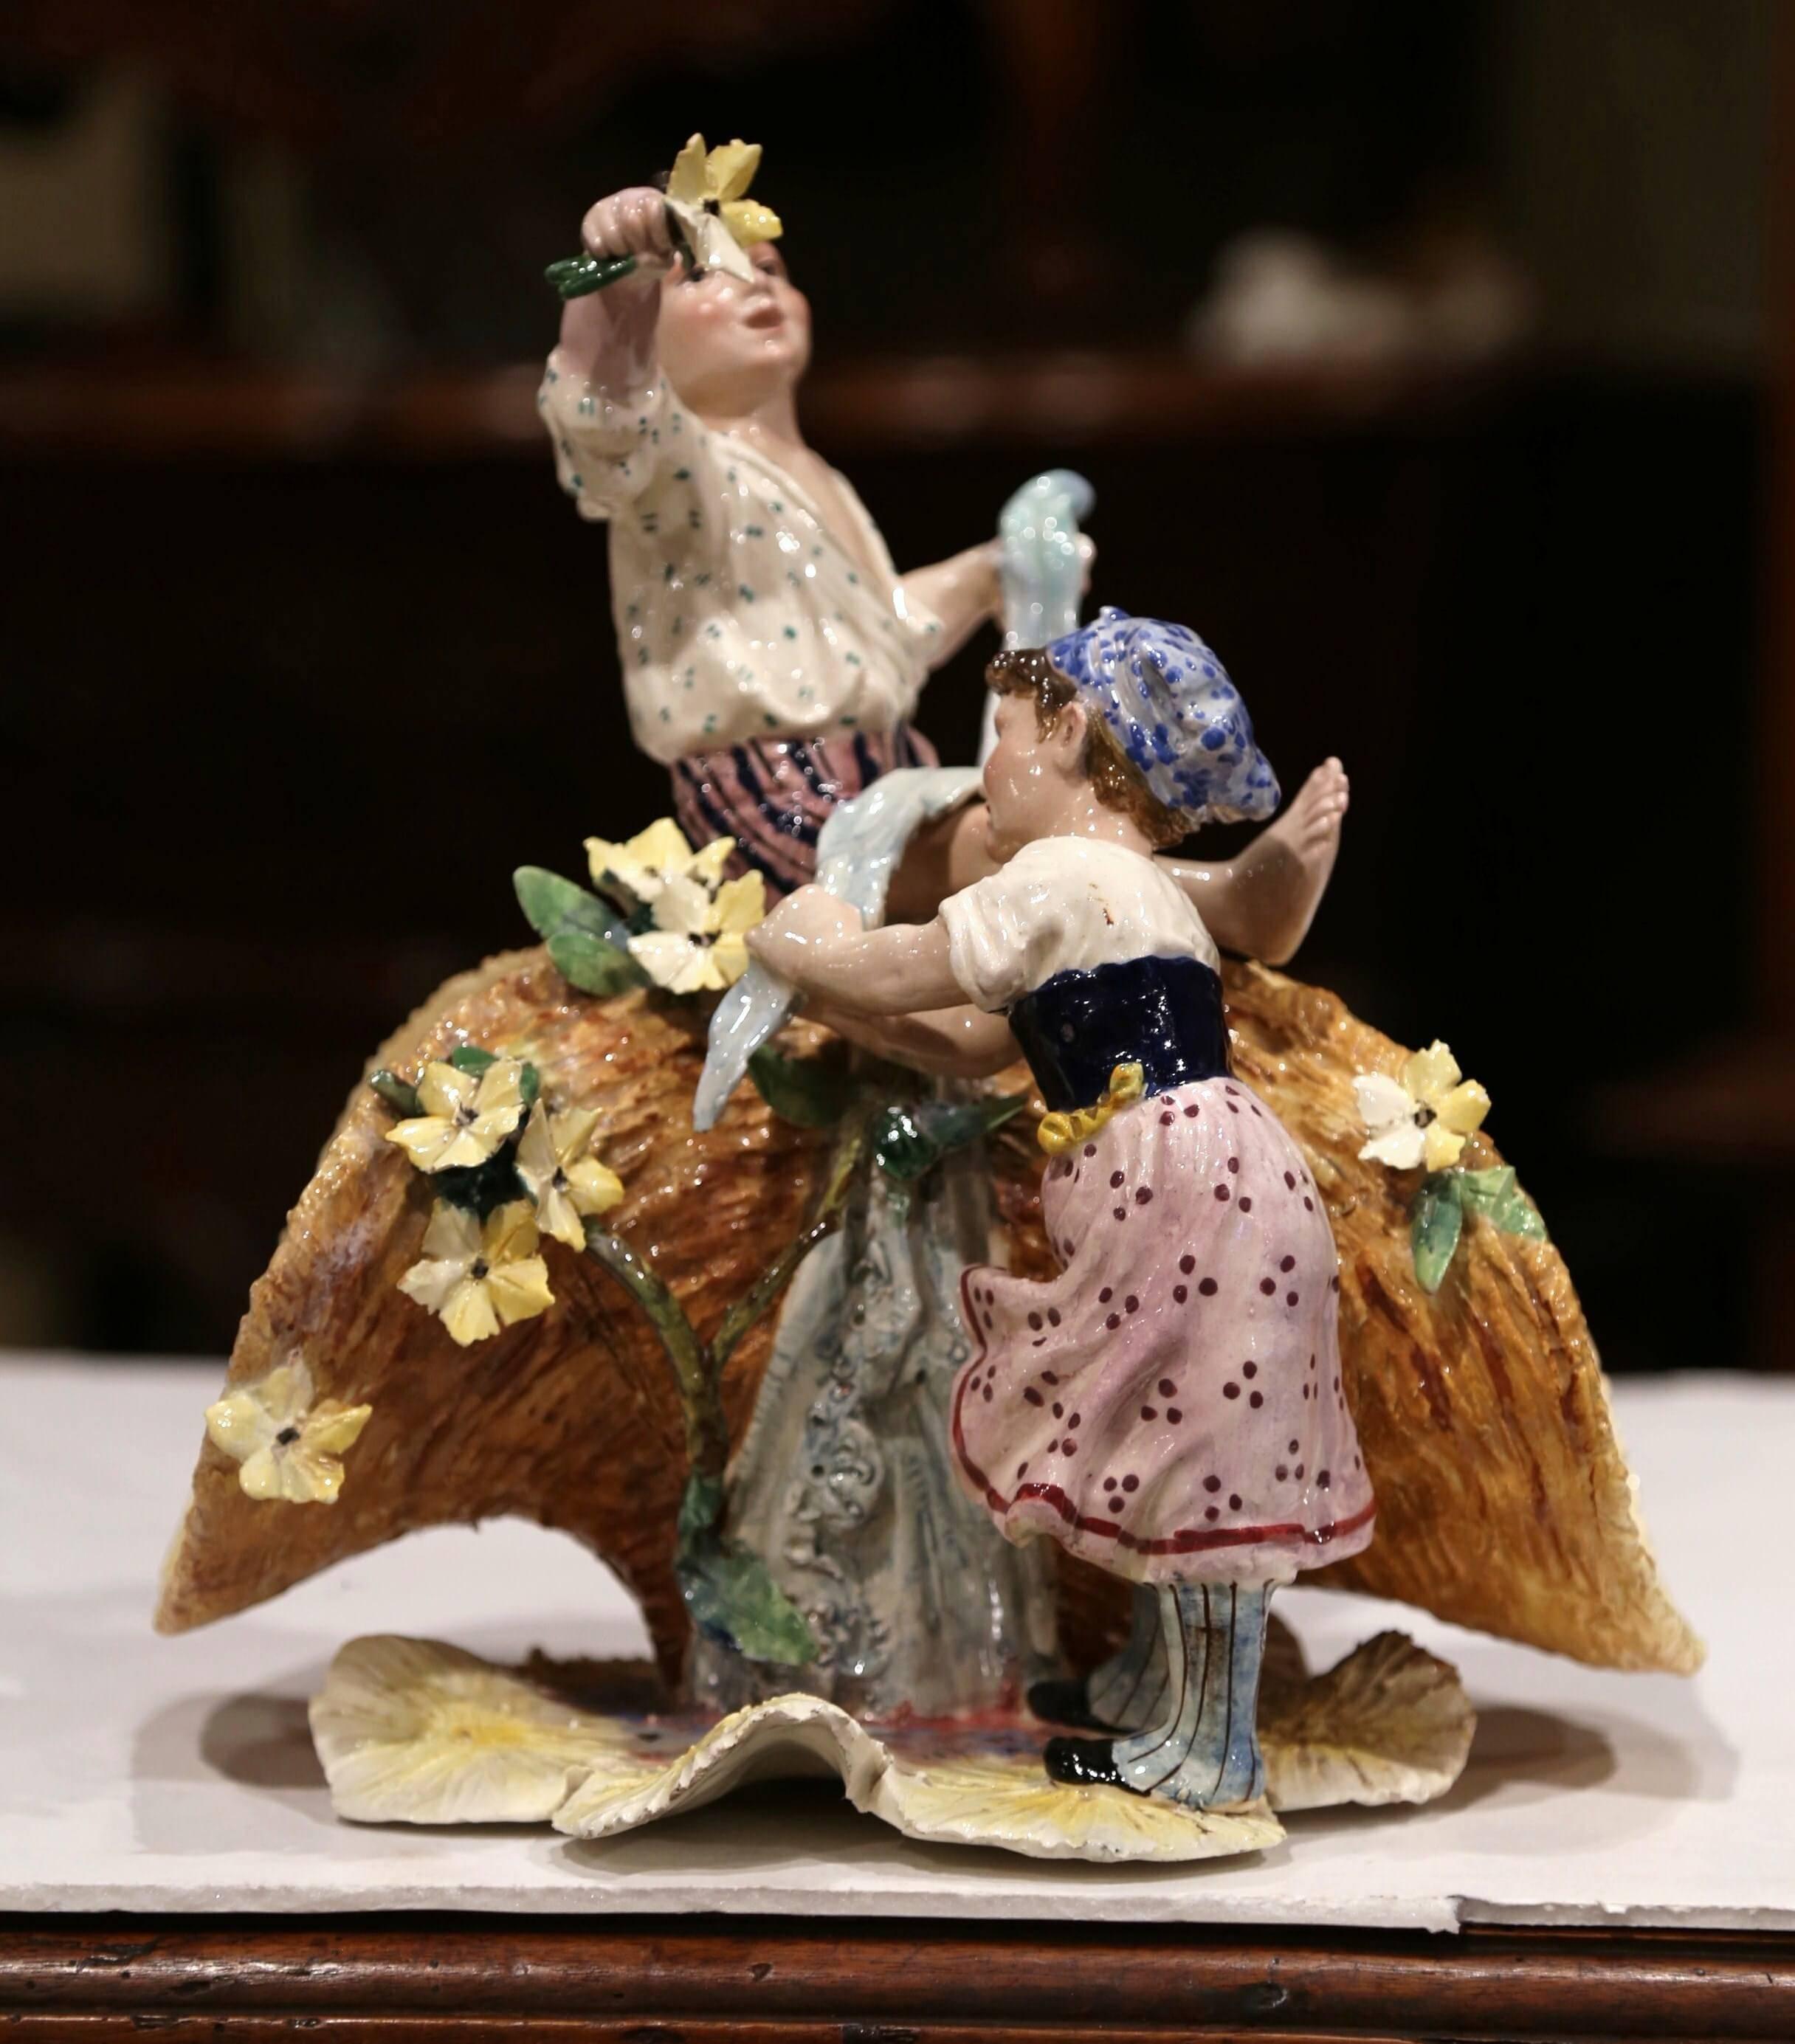 Decorate a shelf with this colorful antique Majolica sculpture composition. Created in France, circa 1920, the porcelain vase features two young children, a boy siting on the basket and a girl standing by. The composition is further decorated with